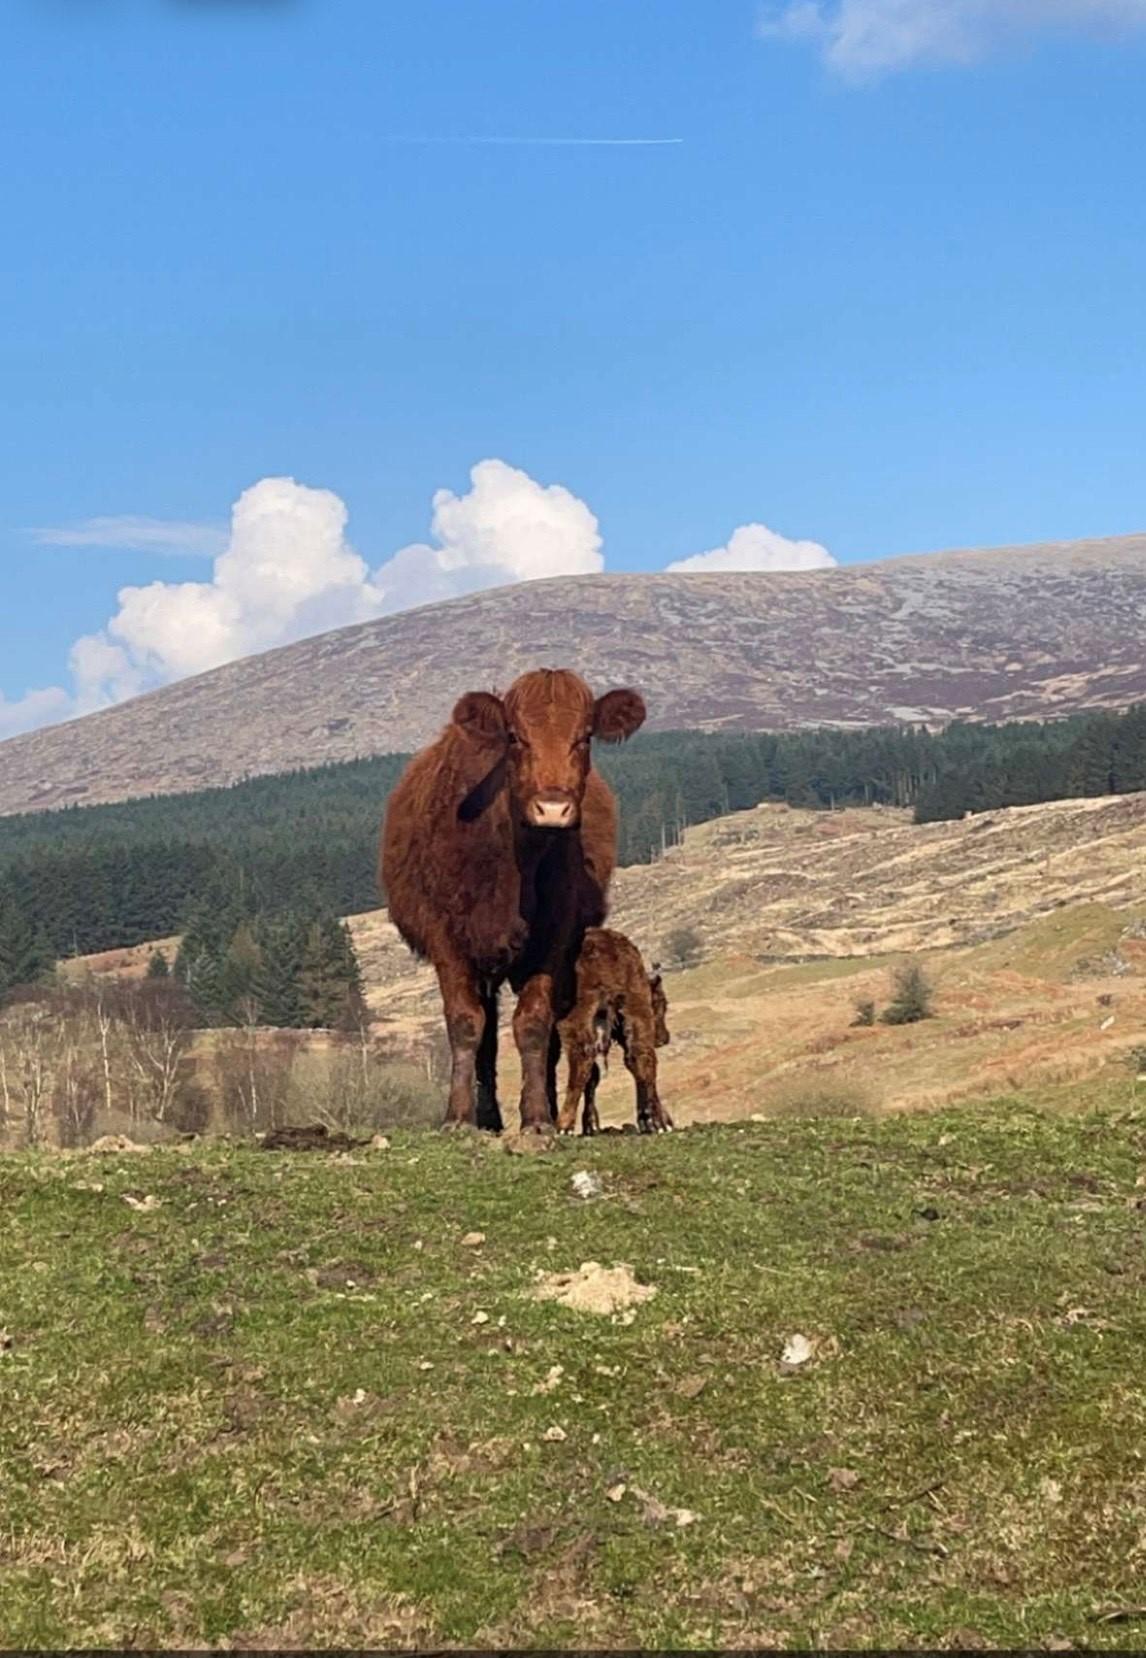 Bobby Landers - Our first calf with Cairnsmore in the background